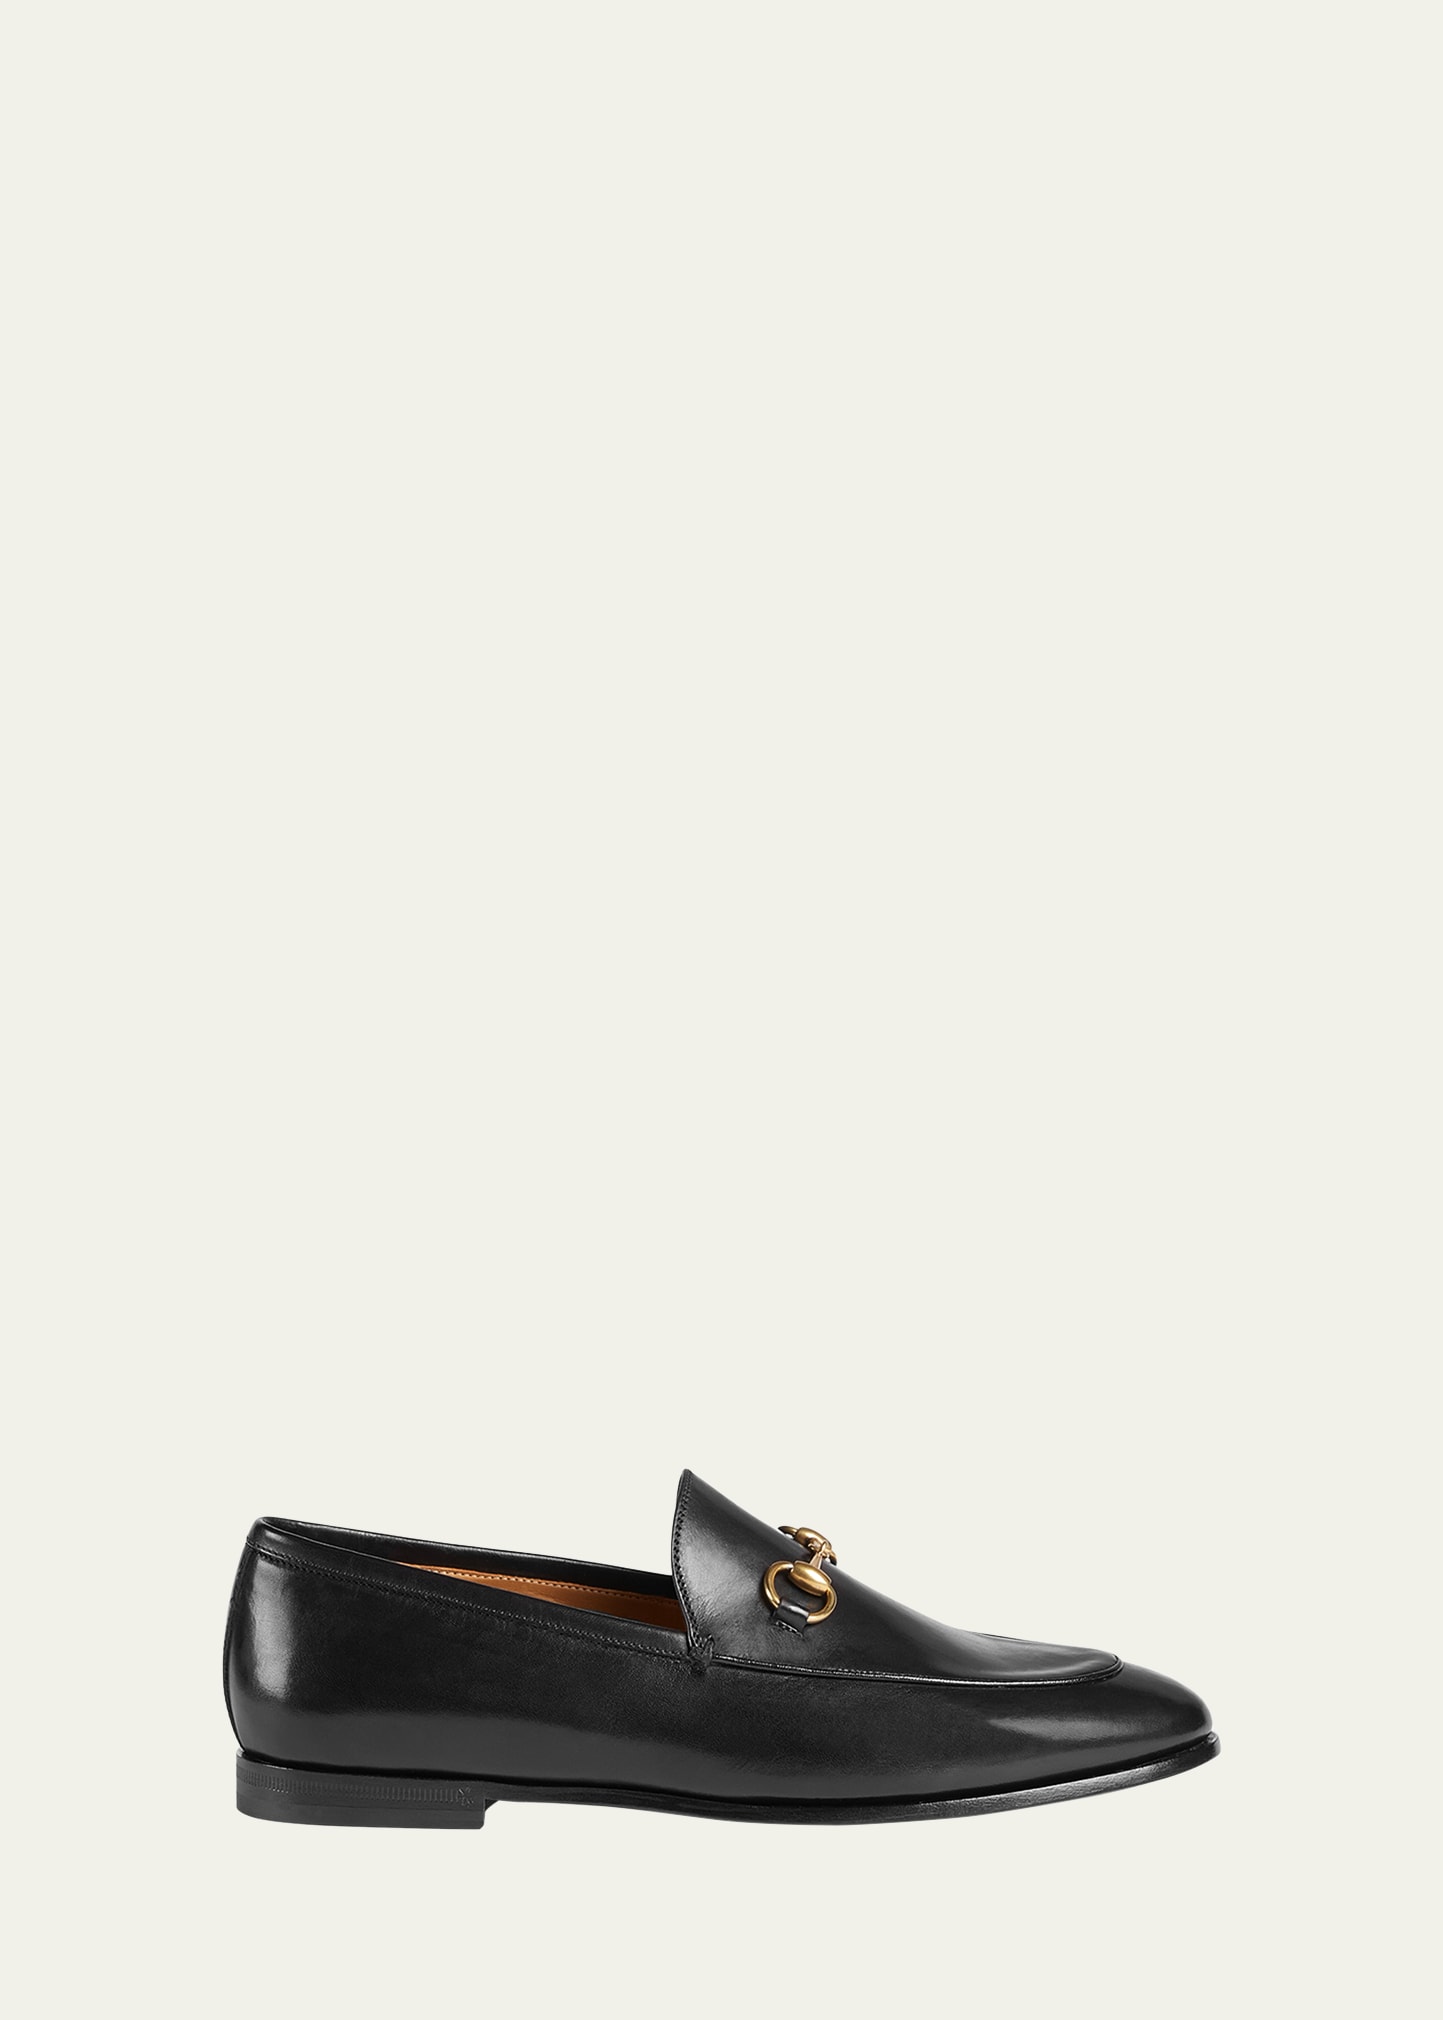 Gucci Jordaan Leather Bit Loafers